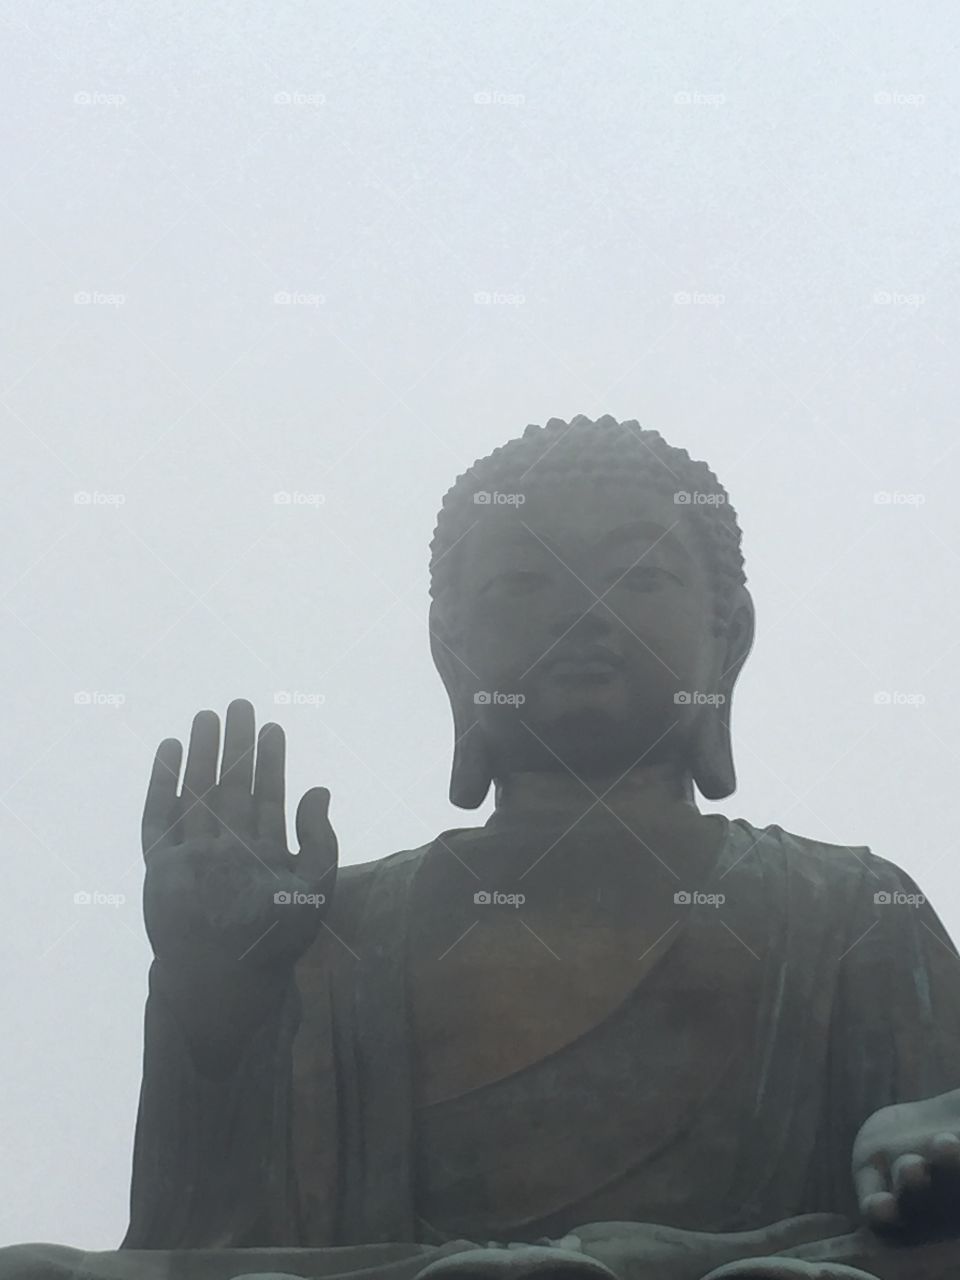 A stormy and cloudy day in Ngong Ping, Lantau Island, The Sacred Buddha in Hong Kong.